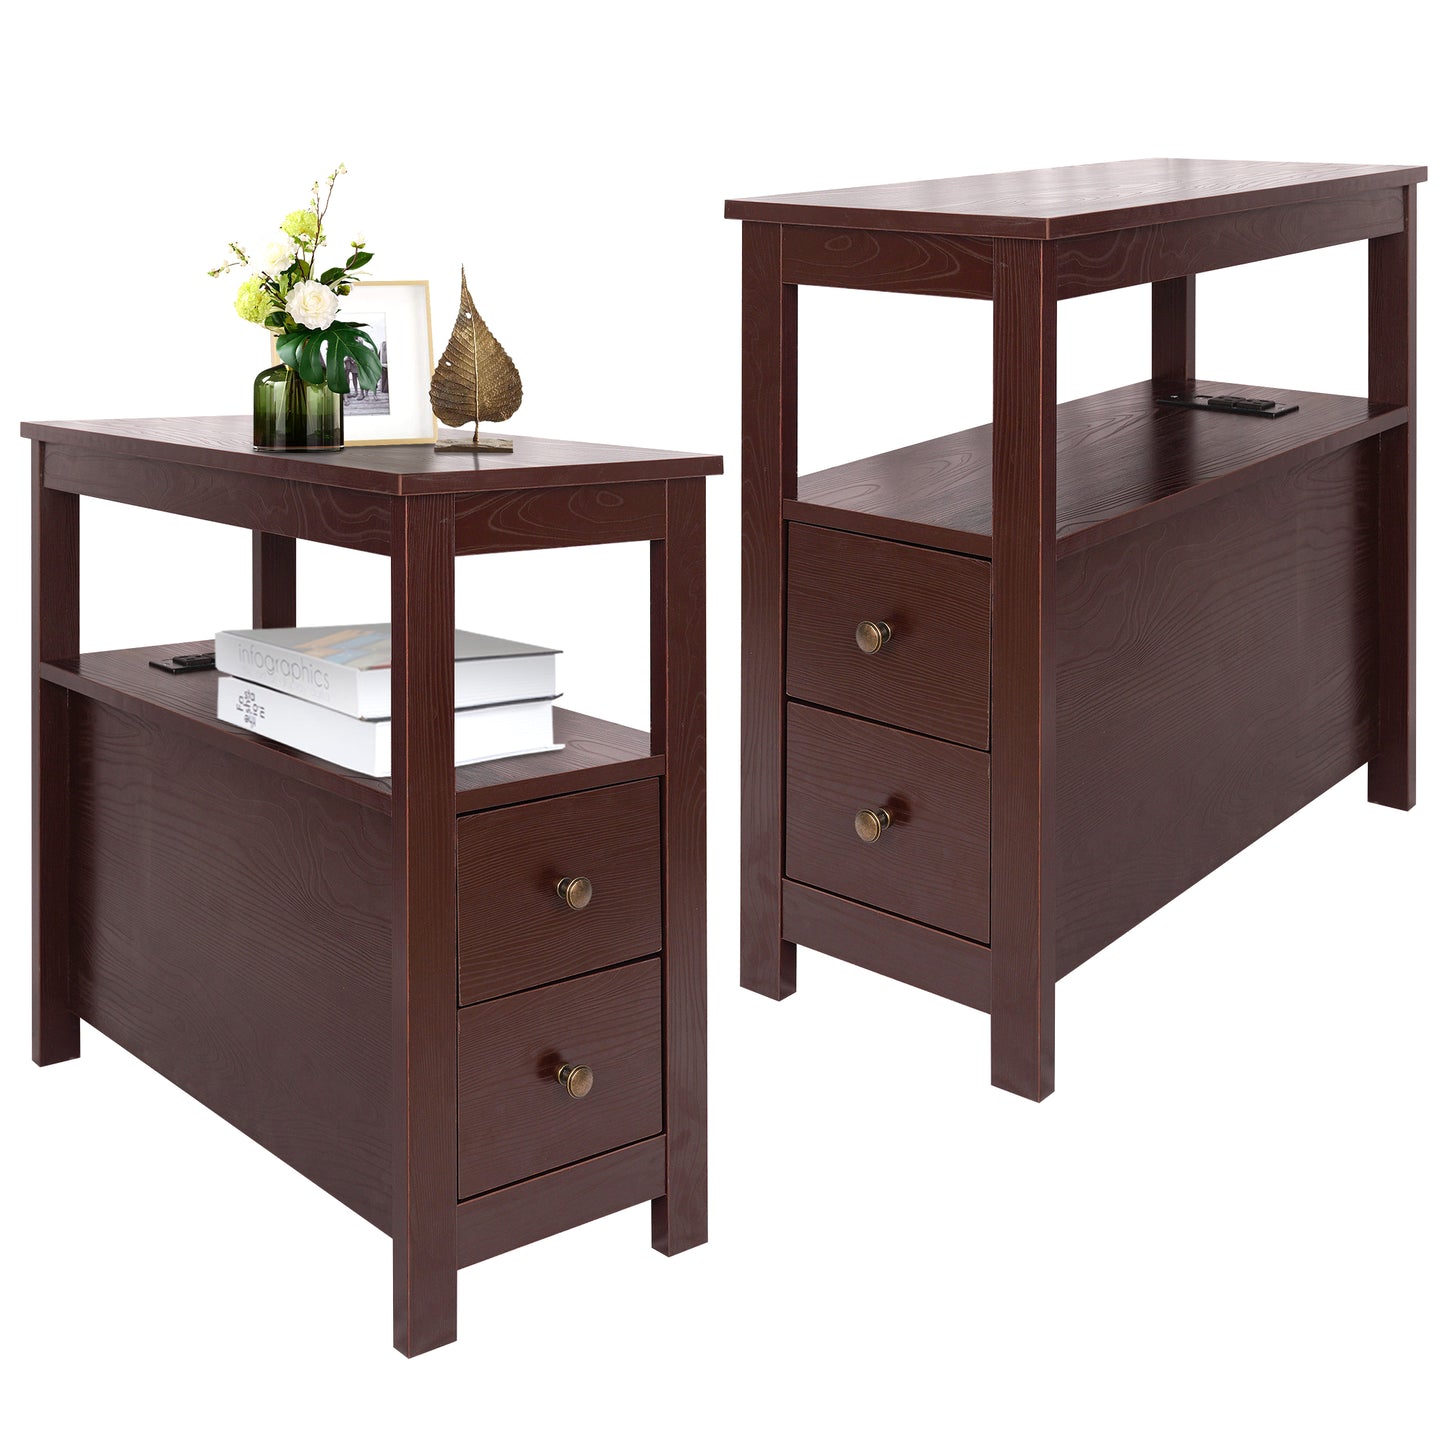 SYNGAR Side Table for Living Room, Nightstand Set of 2, Modern Side Cabinet W/ 2 Drawers, Open Shelf, Power Outlets & USB Ports, Wood End Table with Storage, Bedside Table for Bedroom, Espresso, D4684